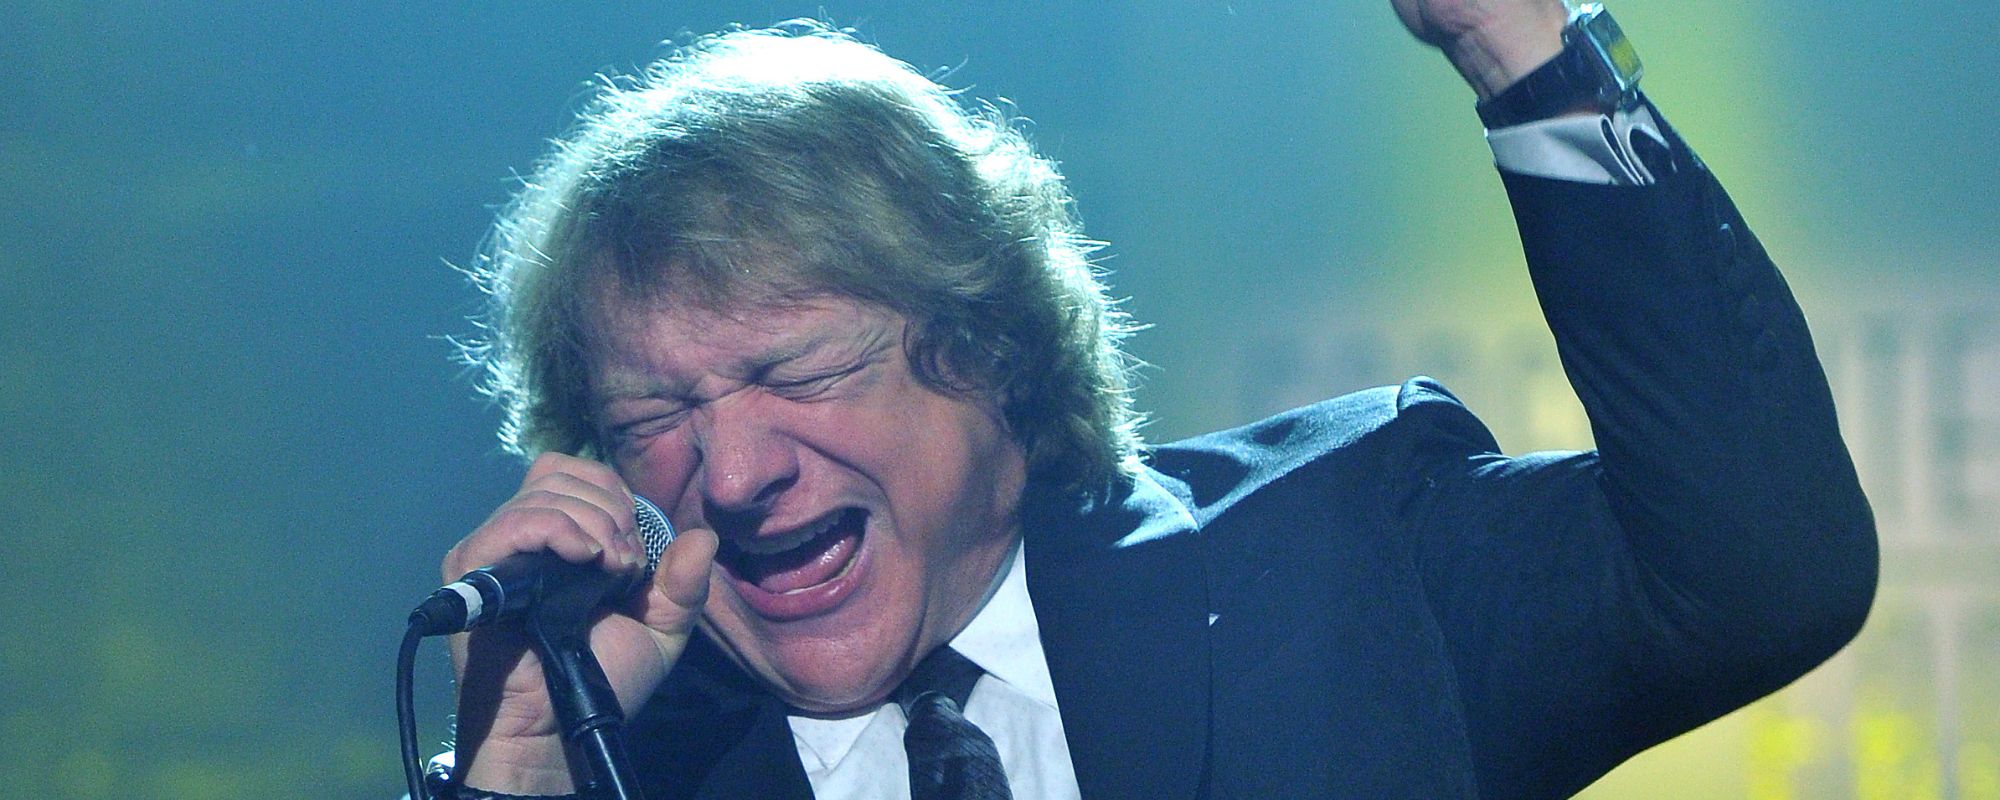 Ex-Foreigner Vocalist Lou Gramm Wants To Play This Song at Hall of Fame Induction